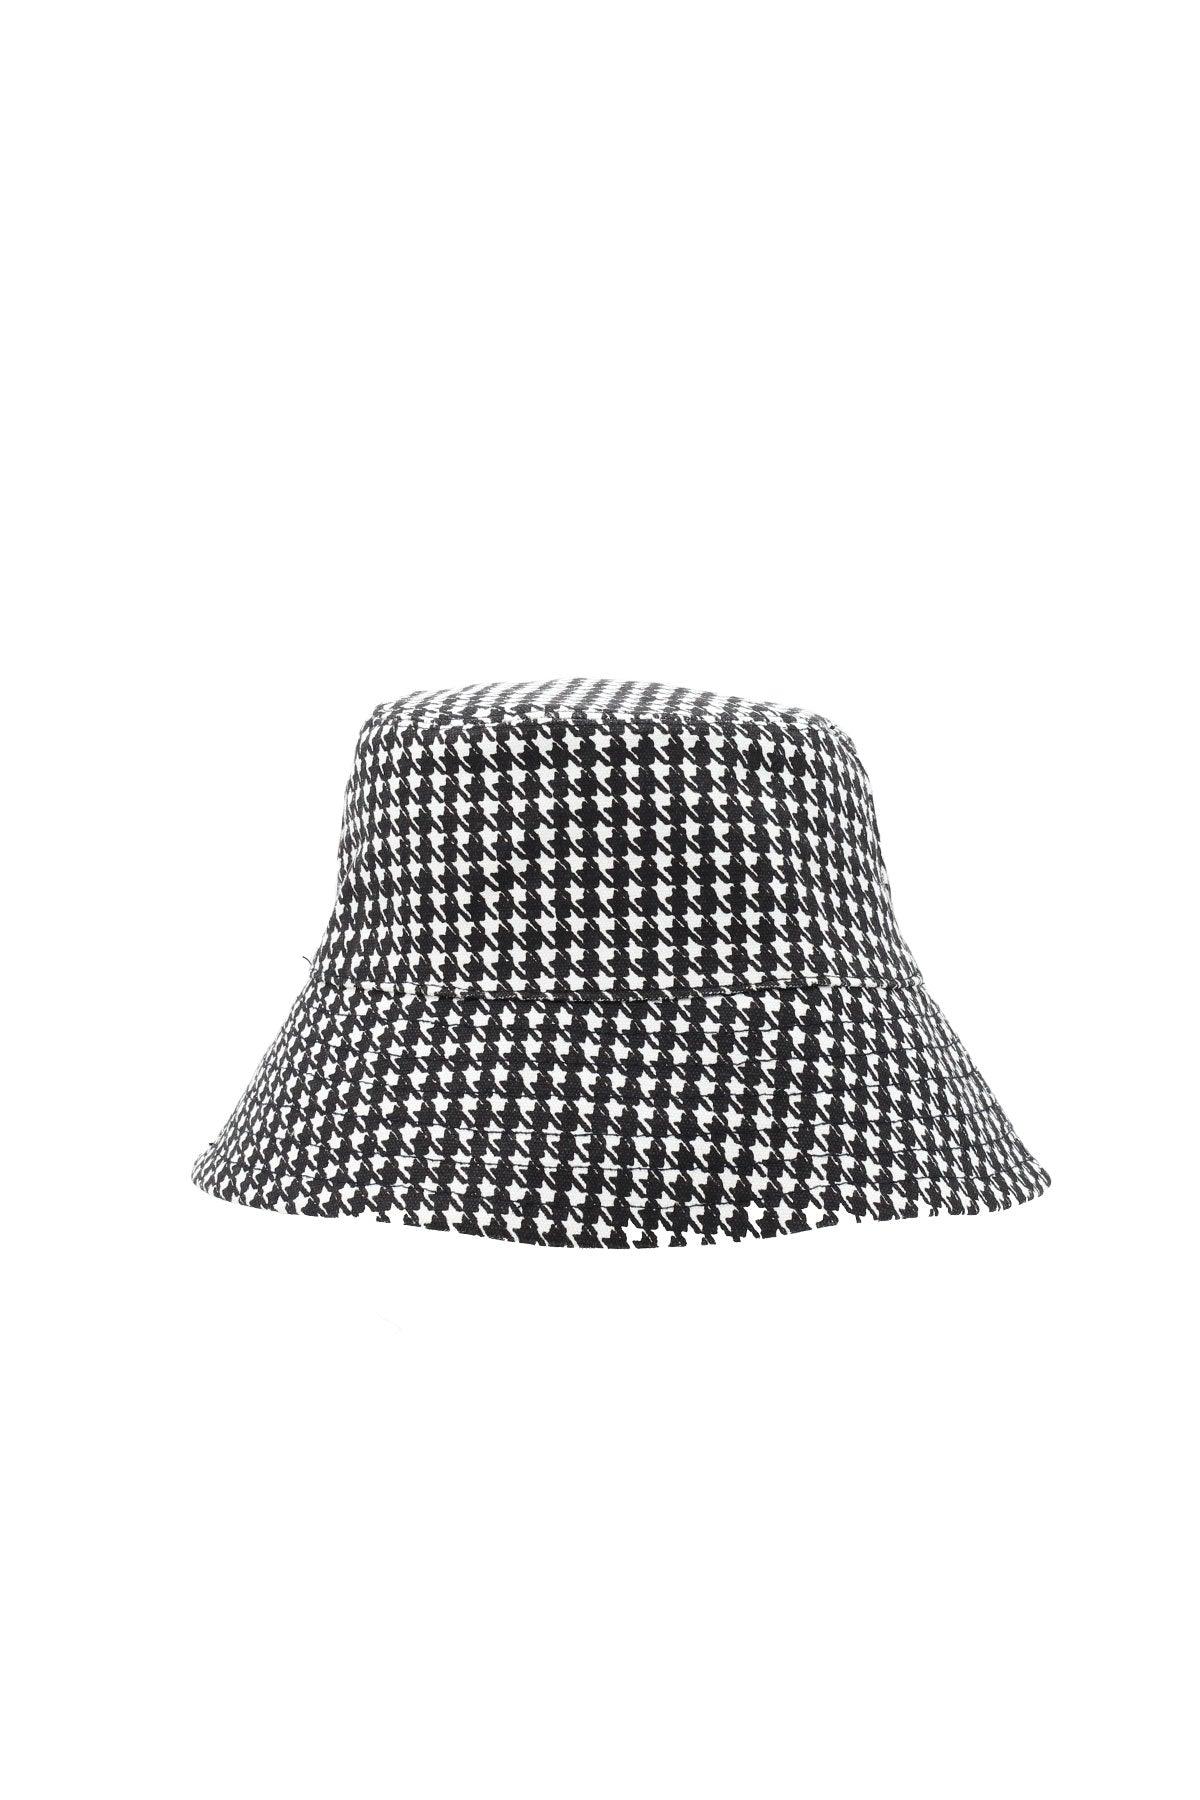 Houndstooth Bucket Hat Apex Ethical Boutique